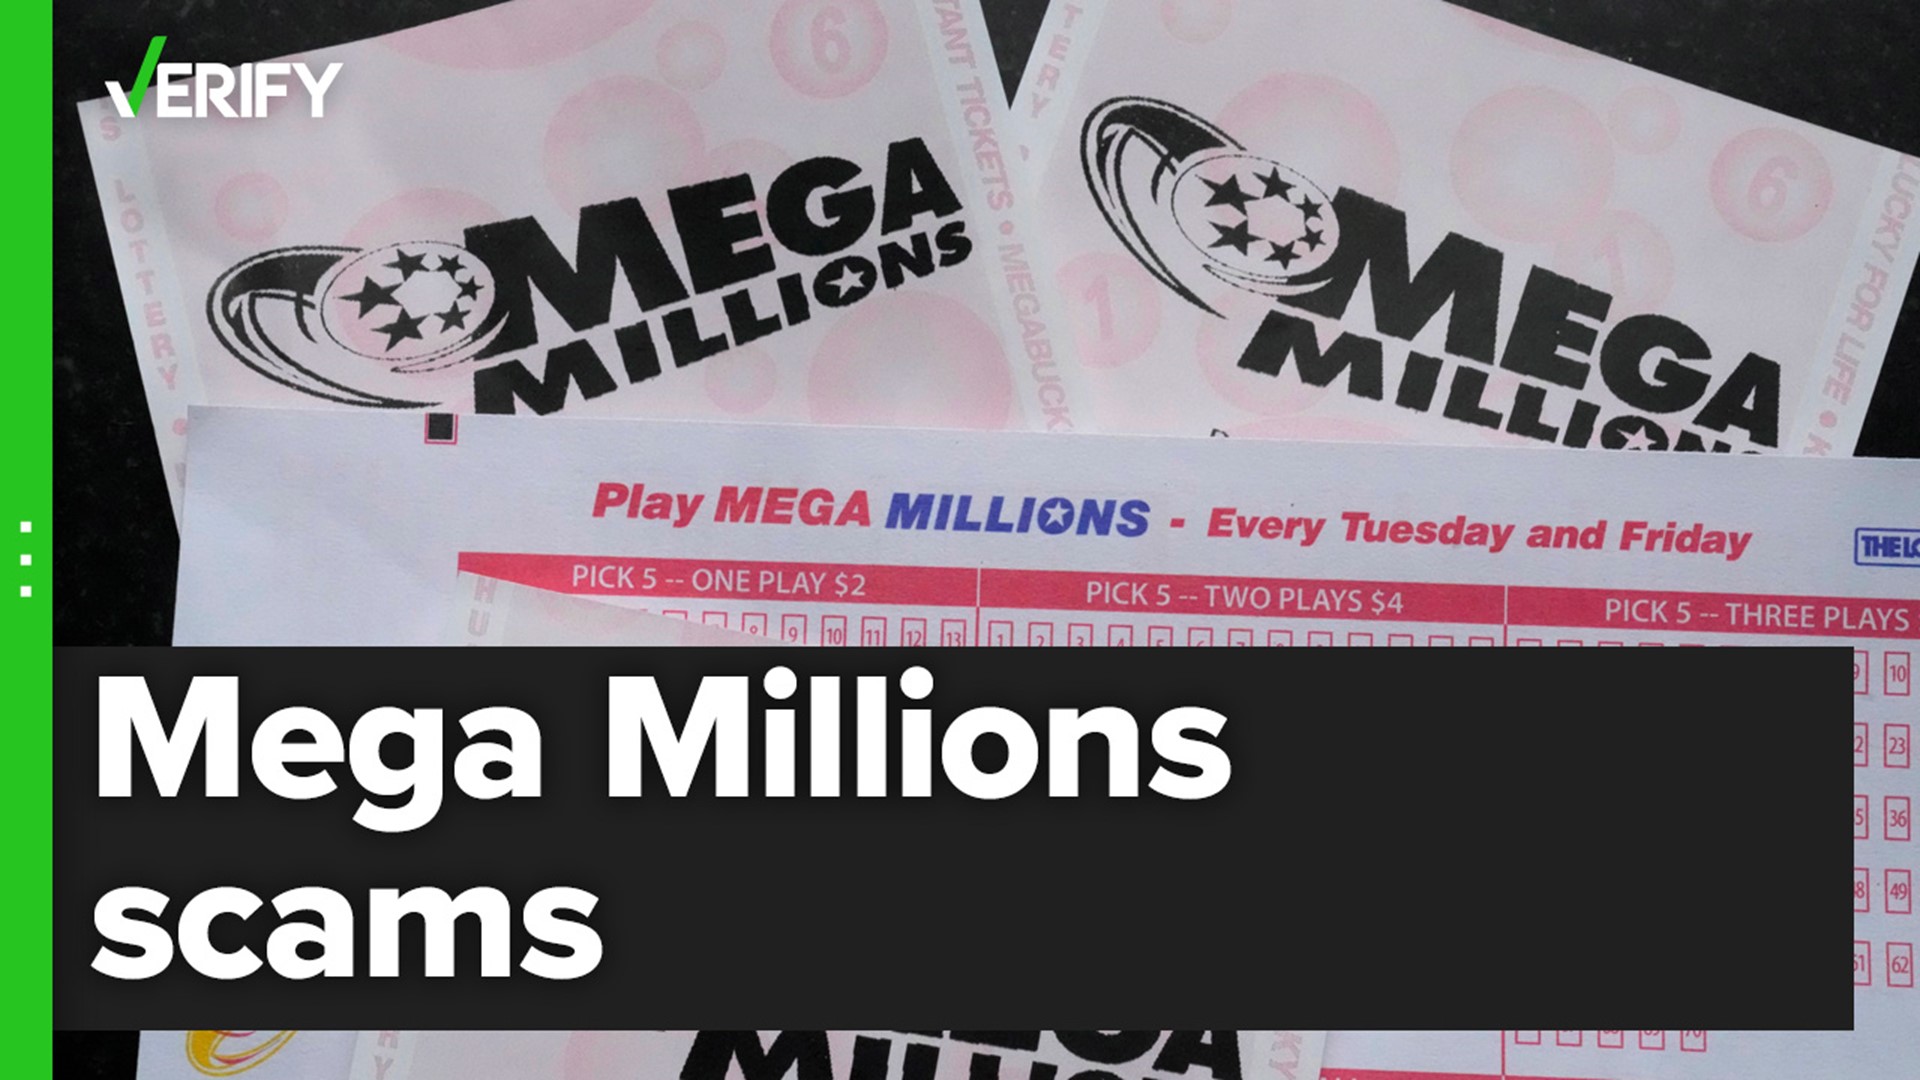 Mega Millions warns that scammers may call, email or text to tell you that you're a winner.